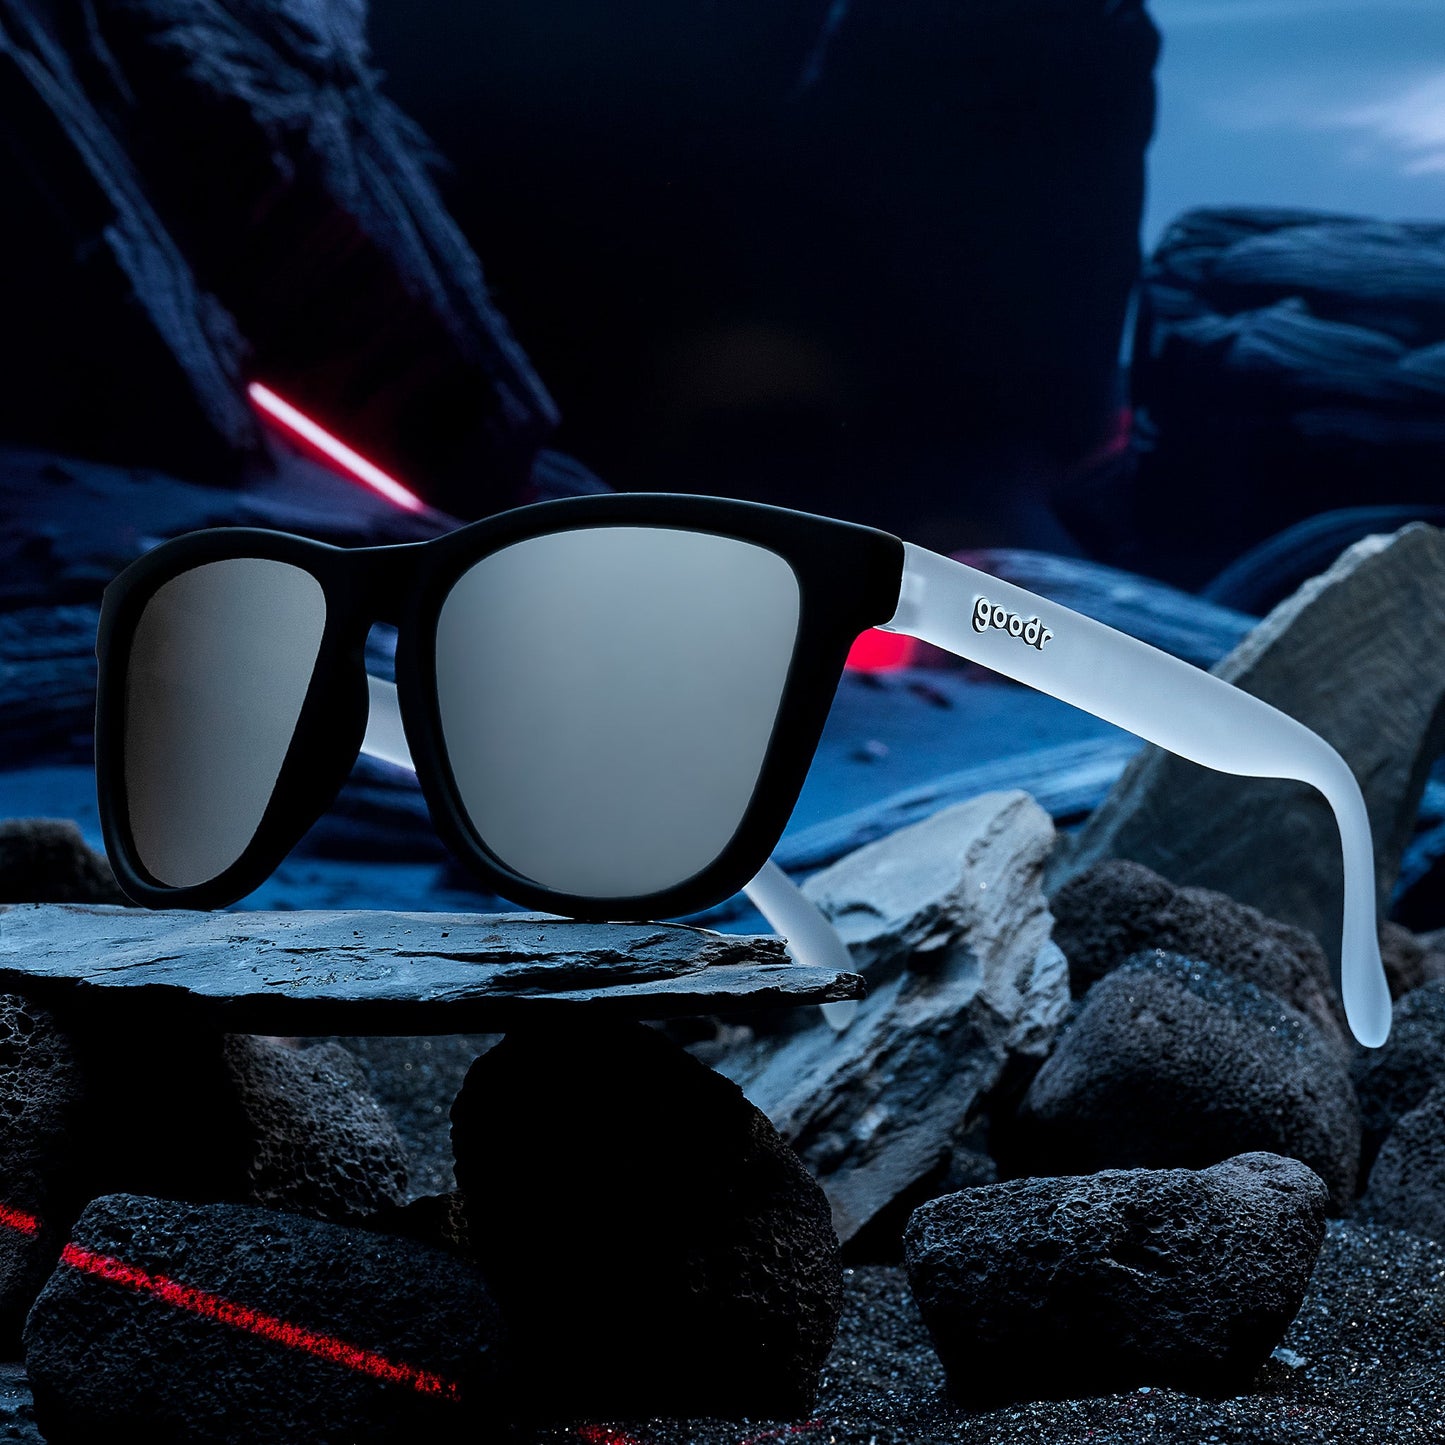 "The Empire Did Nothing Wrong” May The Fourth - OG Polarized Sunglasses Goodr